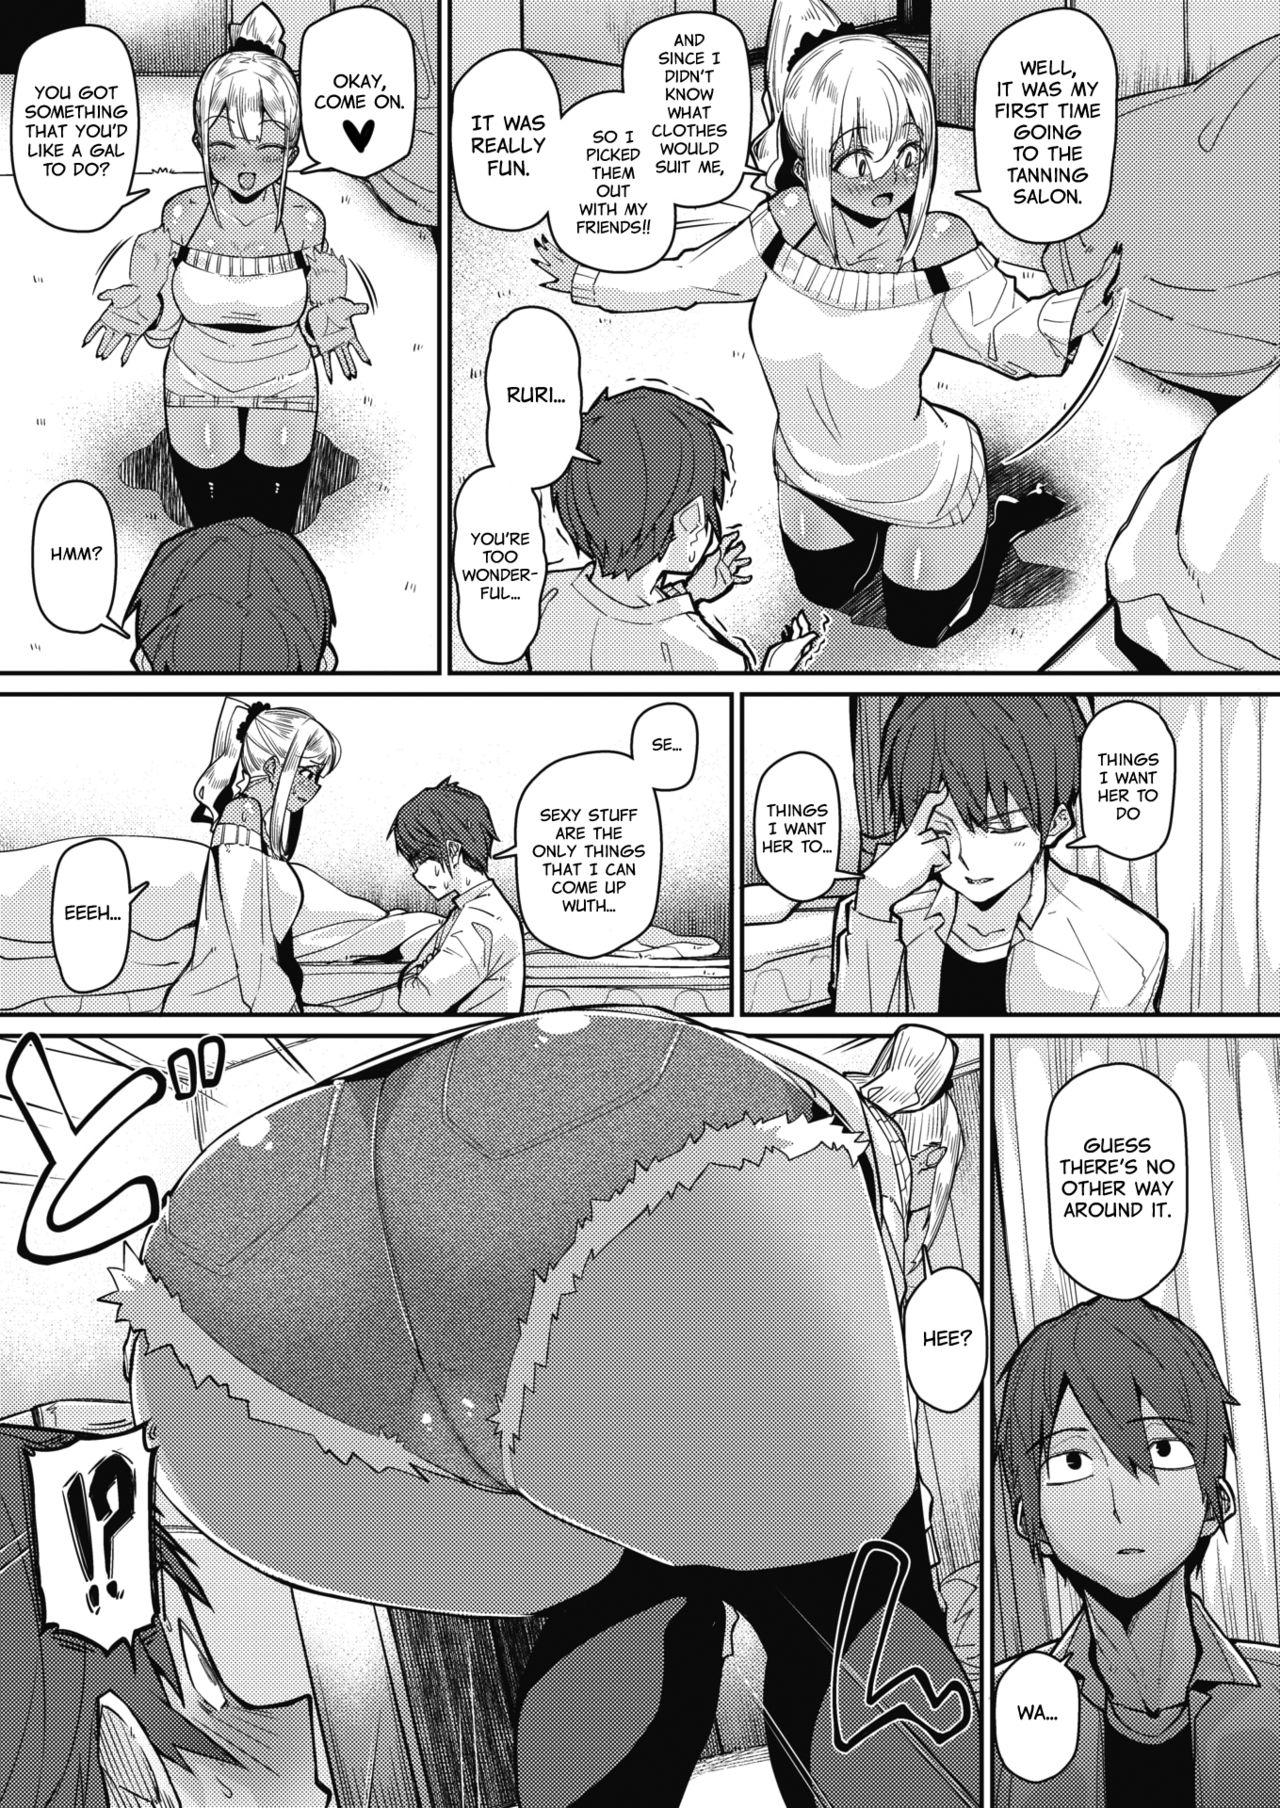 Big Black Dick Gekkan "Za Bicchi" wo Mita Onna no Hannou ni Tsuite | About the Reaction of the Girl Who Saw "The Bitch Monthly" Hot Women Having Sex - Page 5